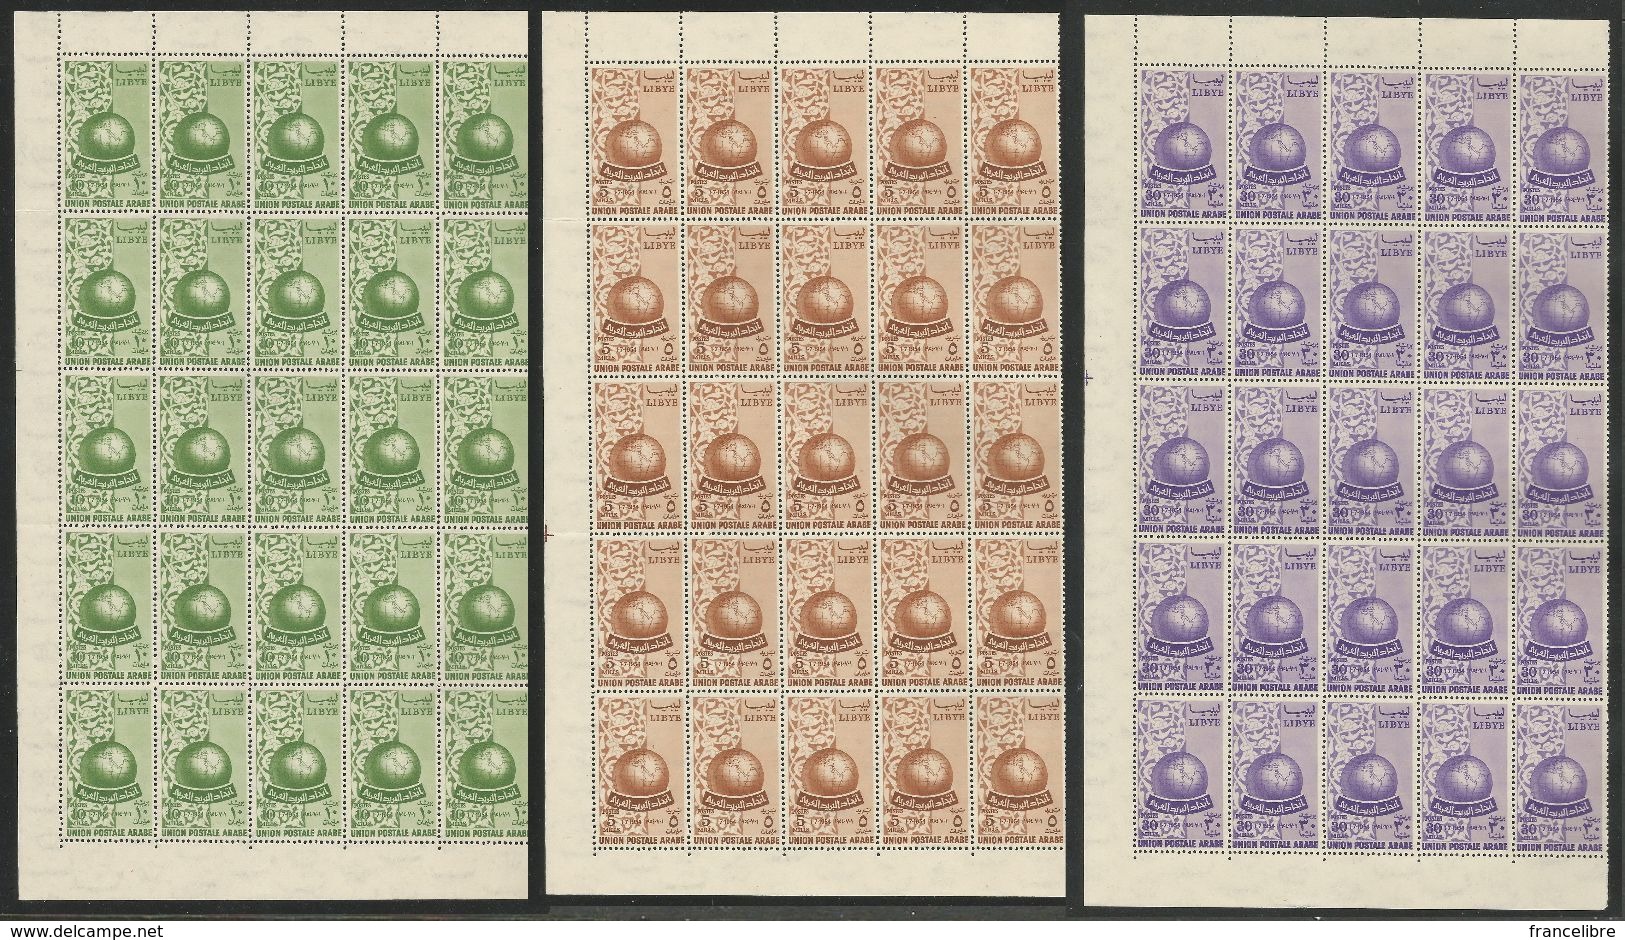 Libya, Arab Postal Unoion 1954 In Block Of 25 Sets, MINT NEVER HINGED. (Block Is Folded Through Perforation) - Libia